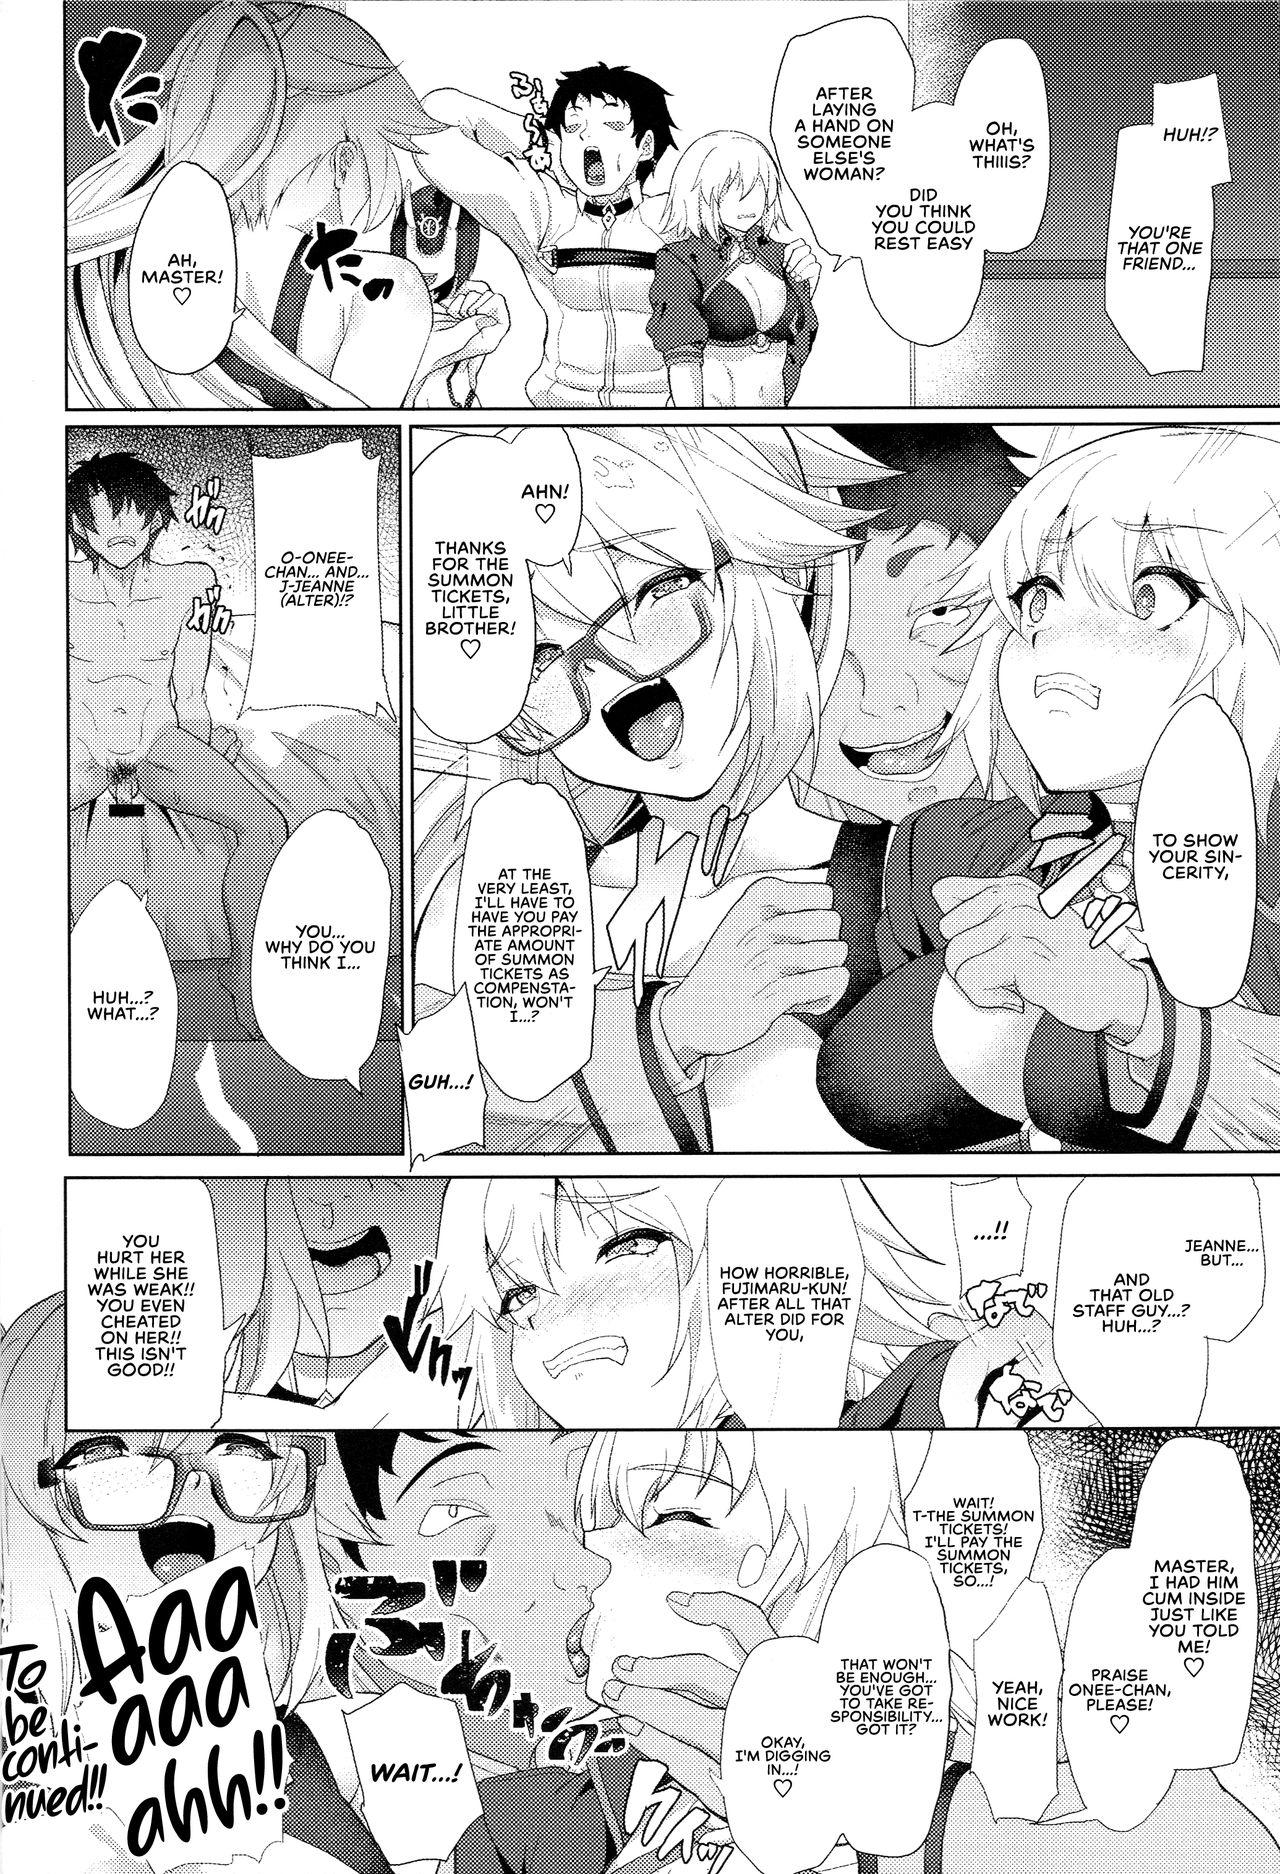 (C96) [Time-Leap (Aoiro Ichigou)] Even Knowing That It's a Trap, I (An NTR Victim) Can't Resist My Friend's Touch-Heavy Jeanne! (Fate/Grand Order) [English] [RedLantern] 21